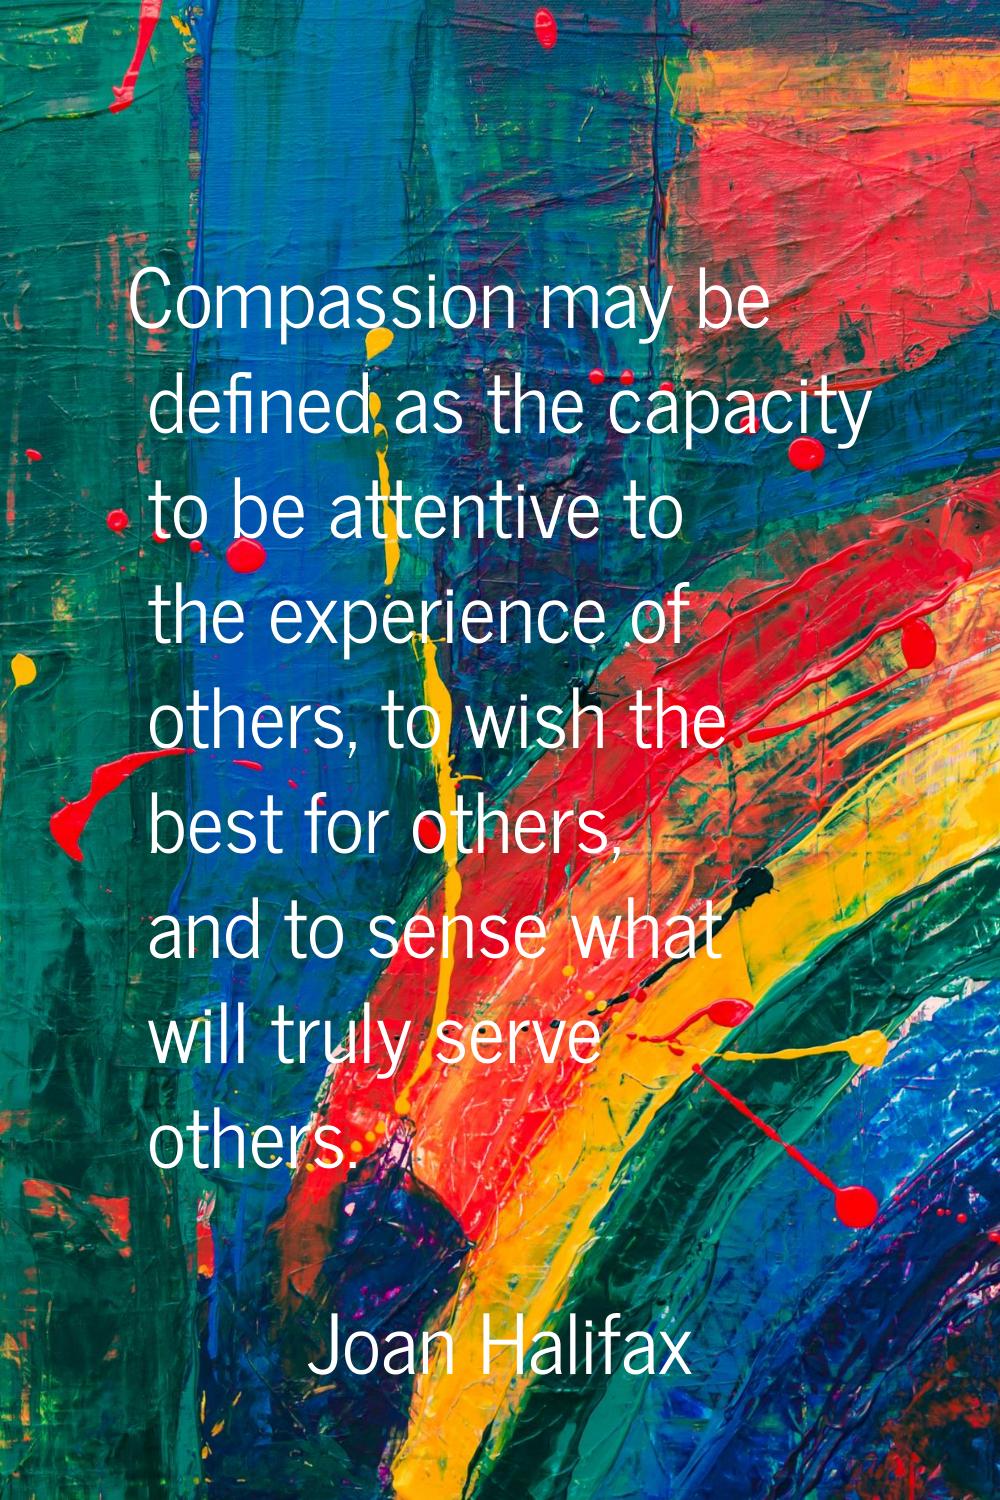 Compassion may be defined as the capacity to be attentive to the experience of others, to wish the 